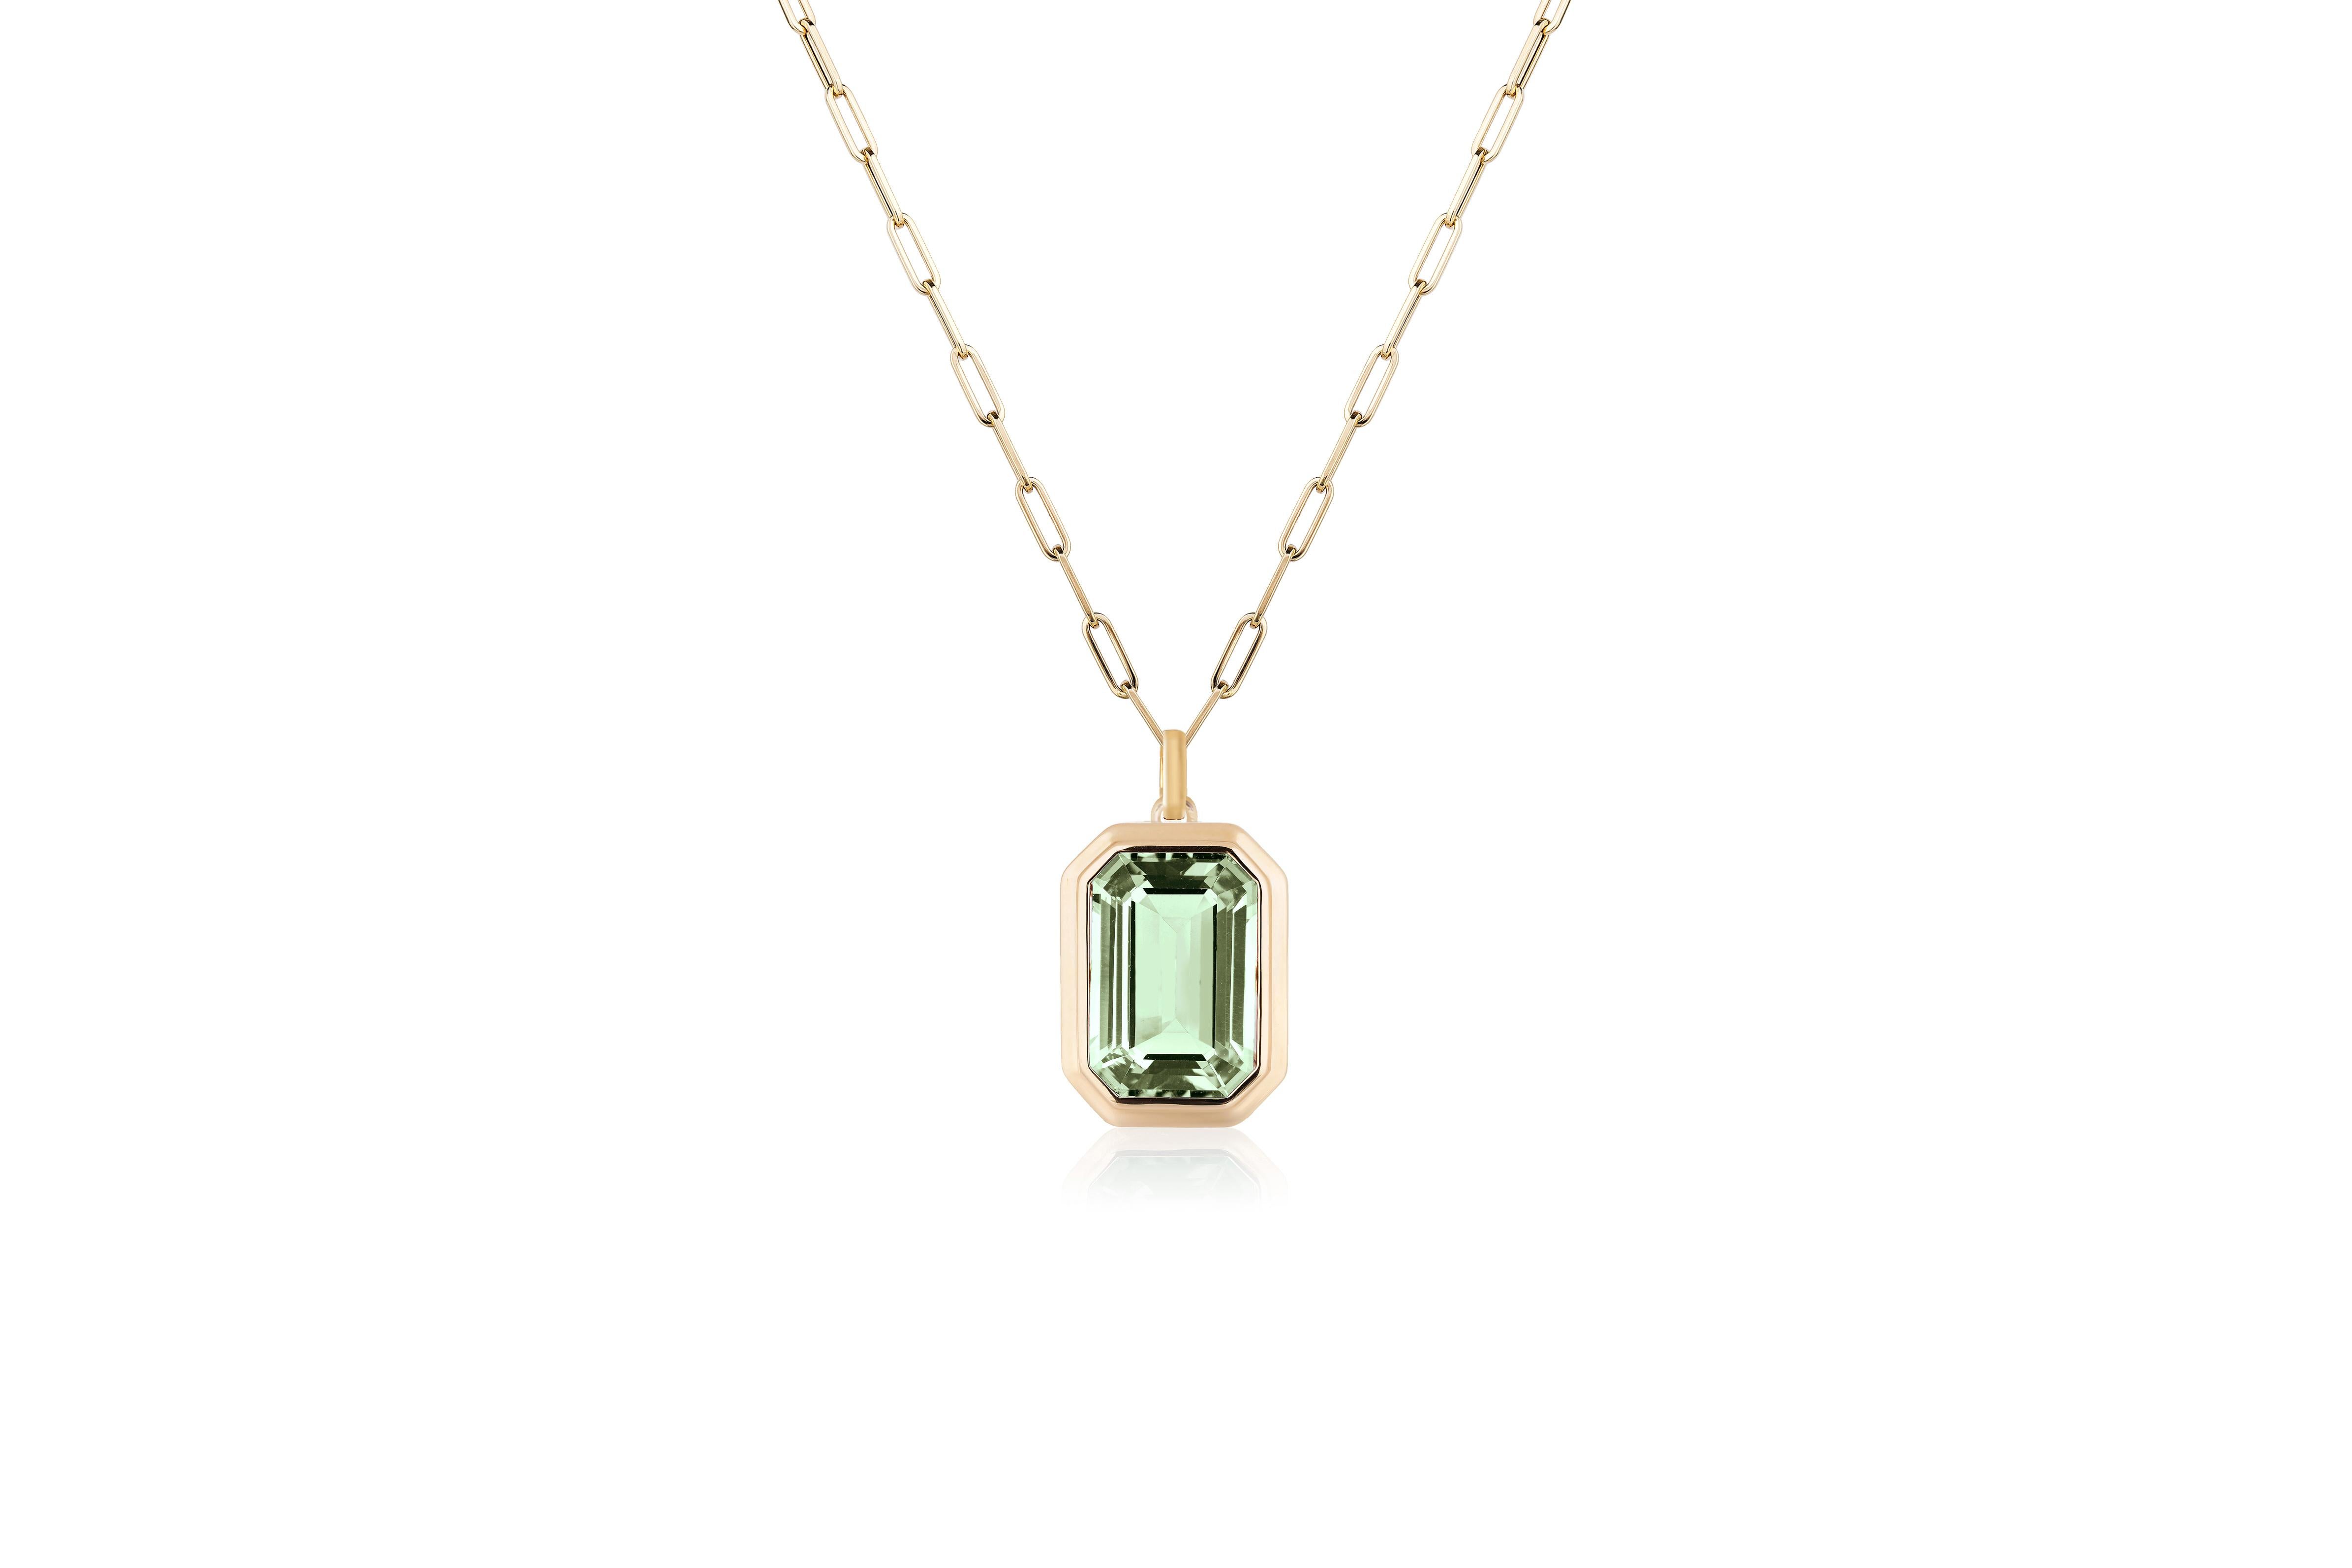 This beautiful Prasiolite Emerald Cut Bezel Set Pendant in 18K Yellow Gold is from our ‘Manhattan’ Collection. Minimalist lines yet bold structures are what our Manhattan Collection is all about. Our pieces represent the famous skyline and